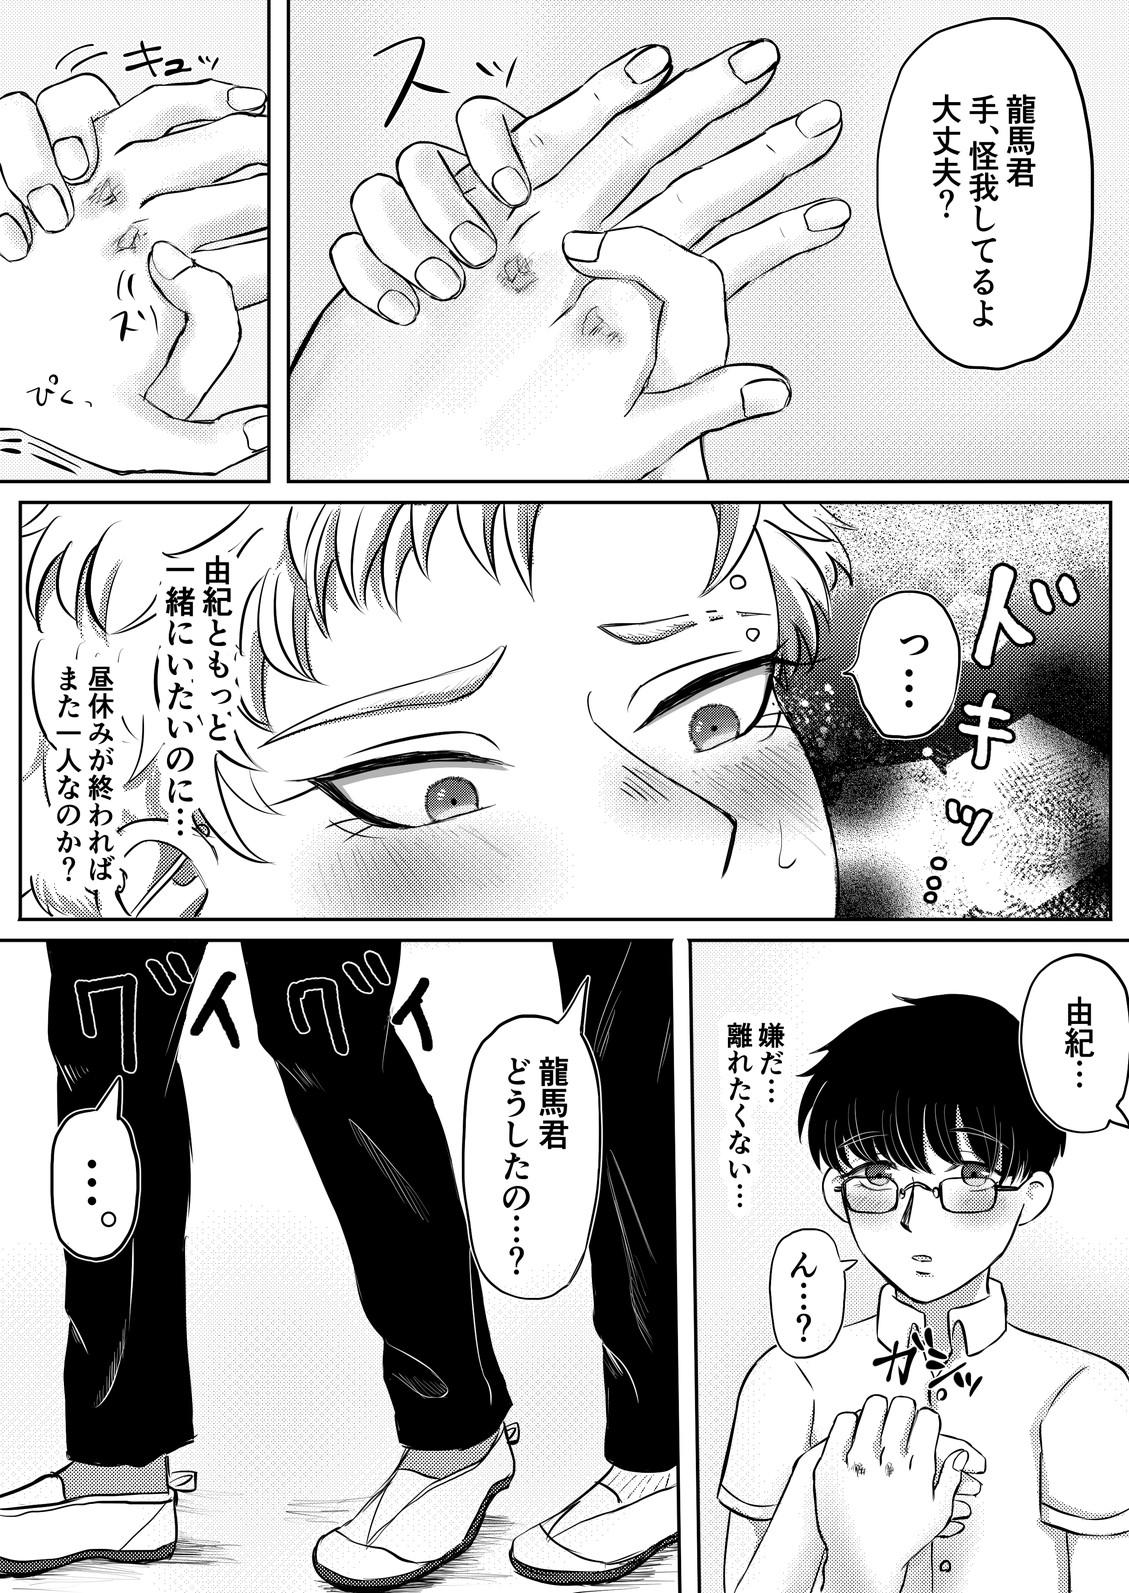 Mama 龍馬君の特等席 Butts - Page 11